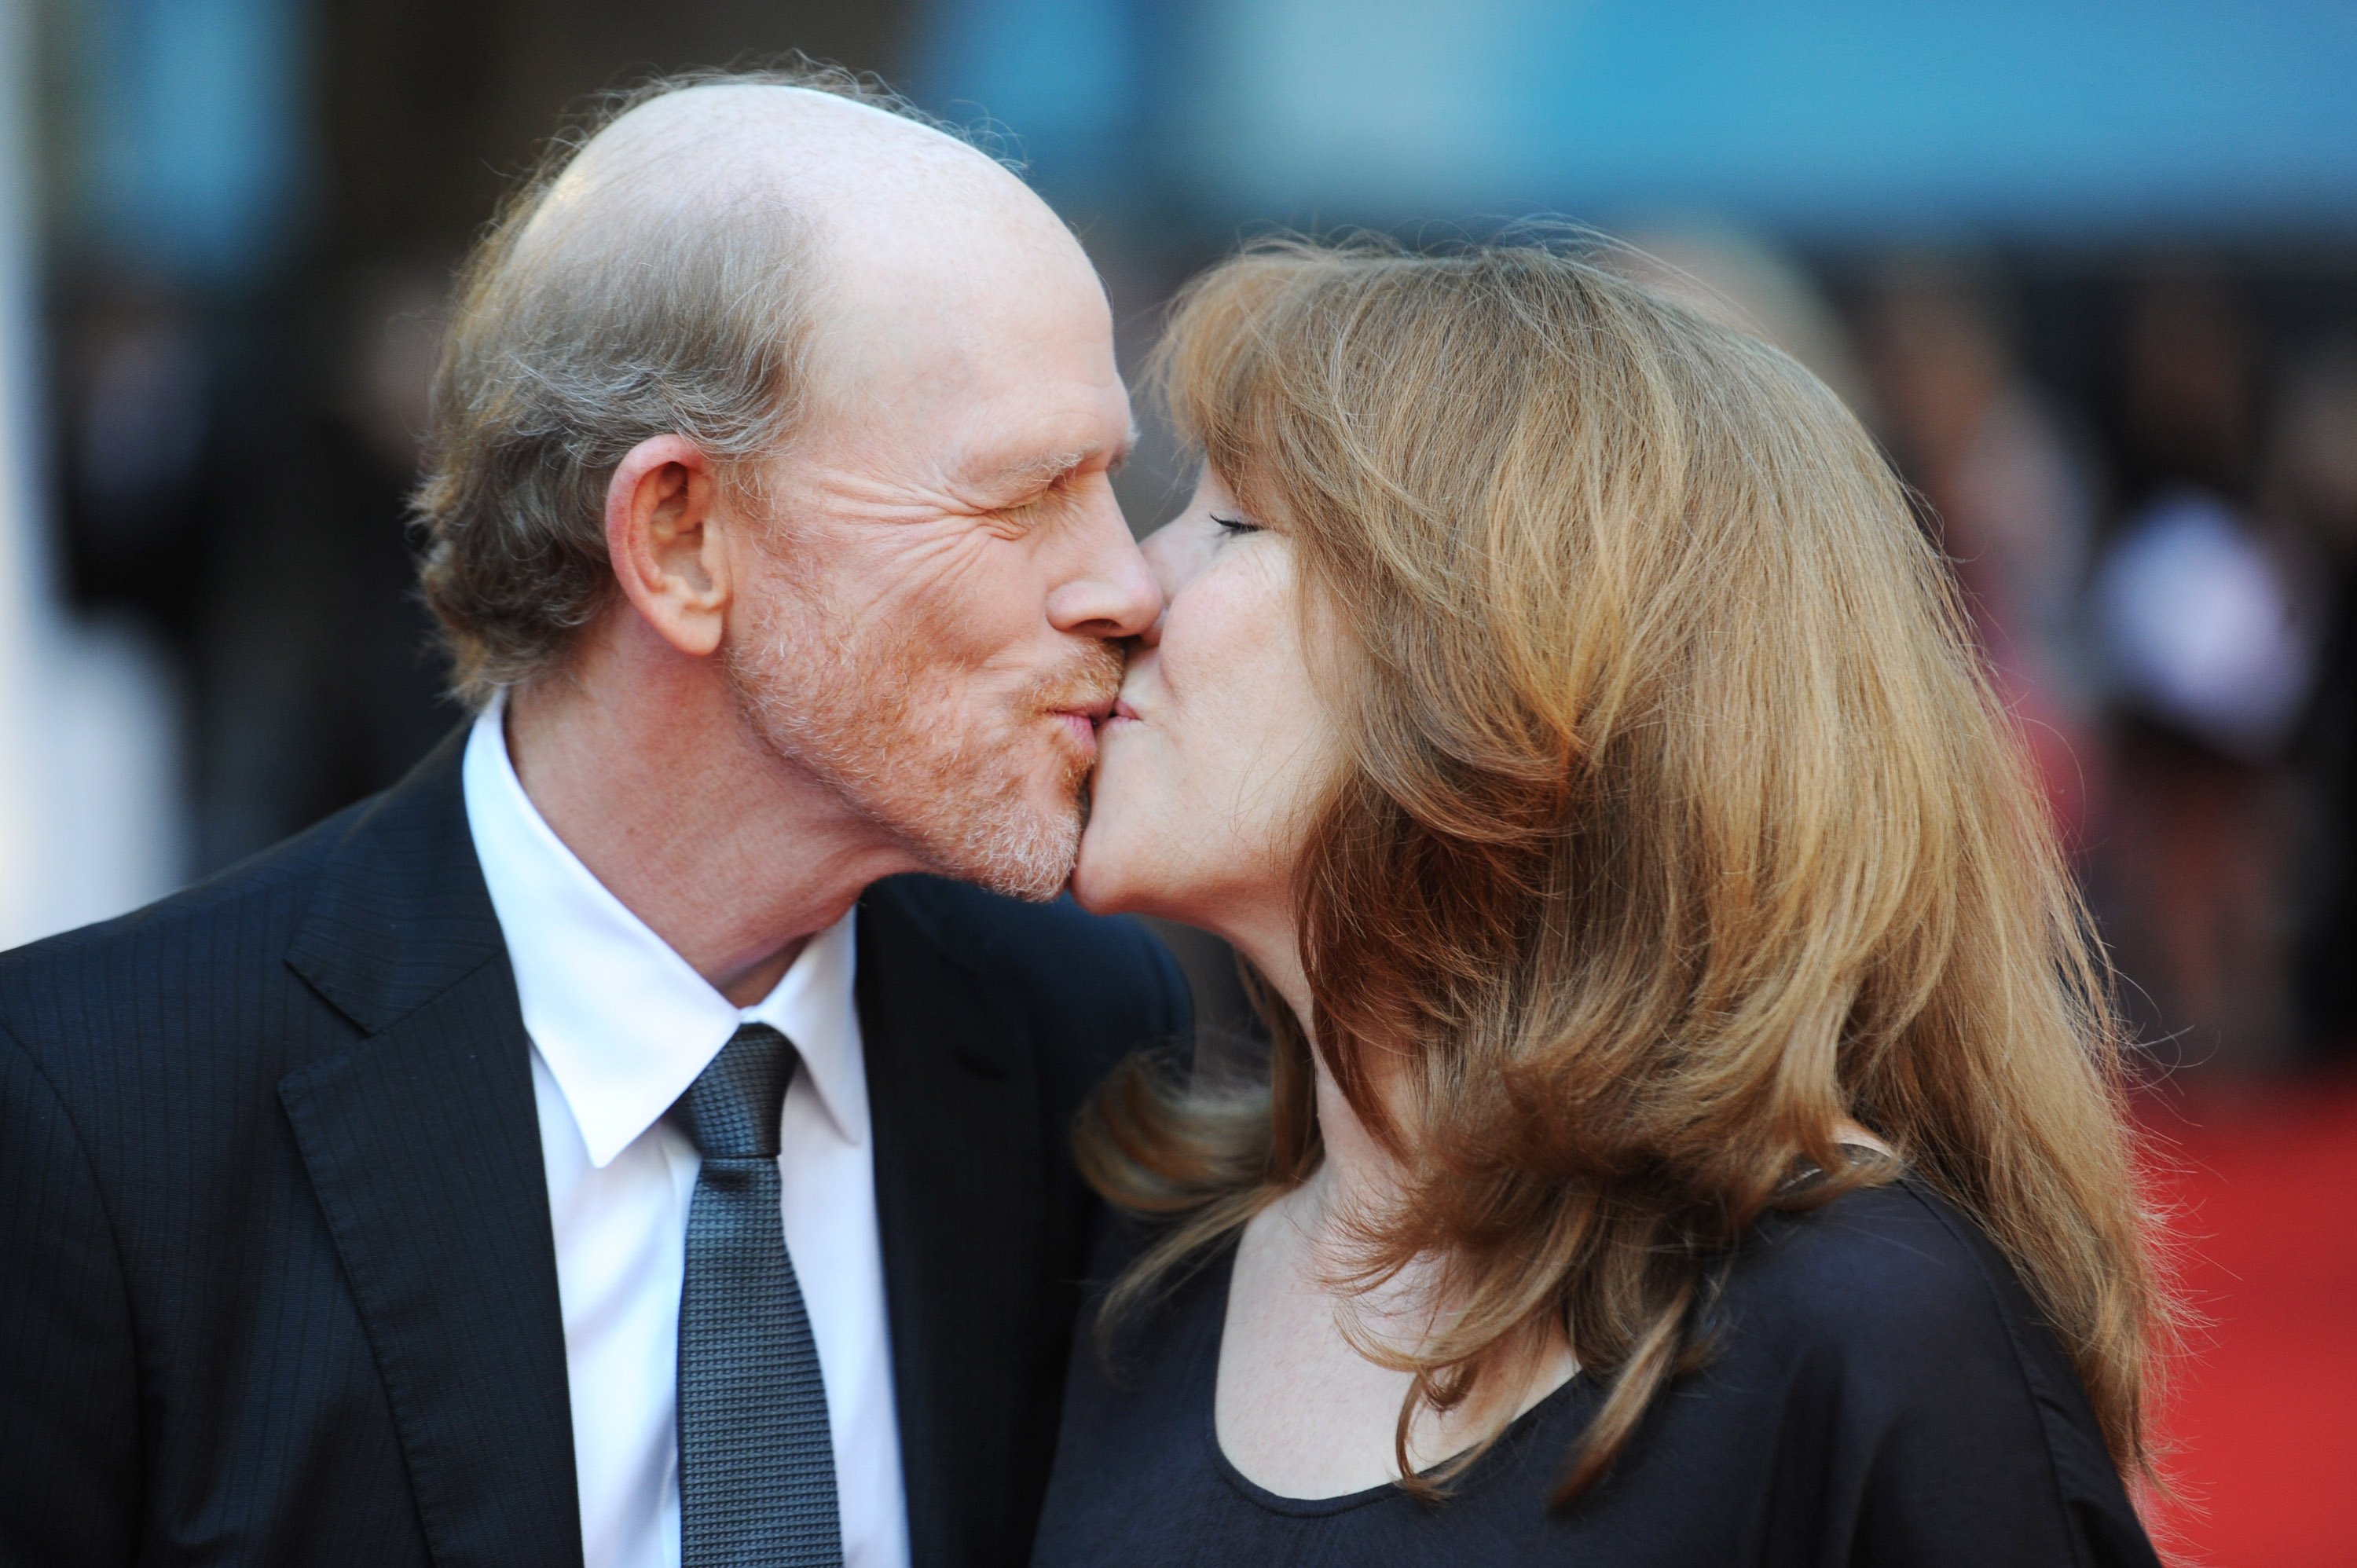 Ron Howard and his wife Cheryl Howard in London in 2013. |  Source: Getty Images